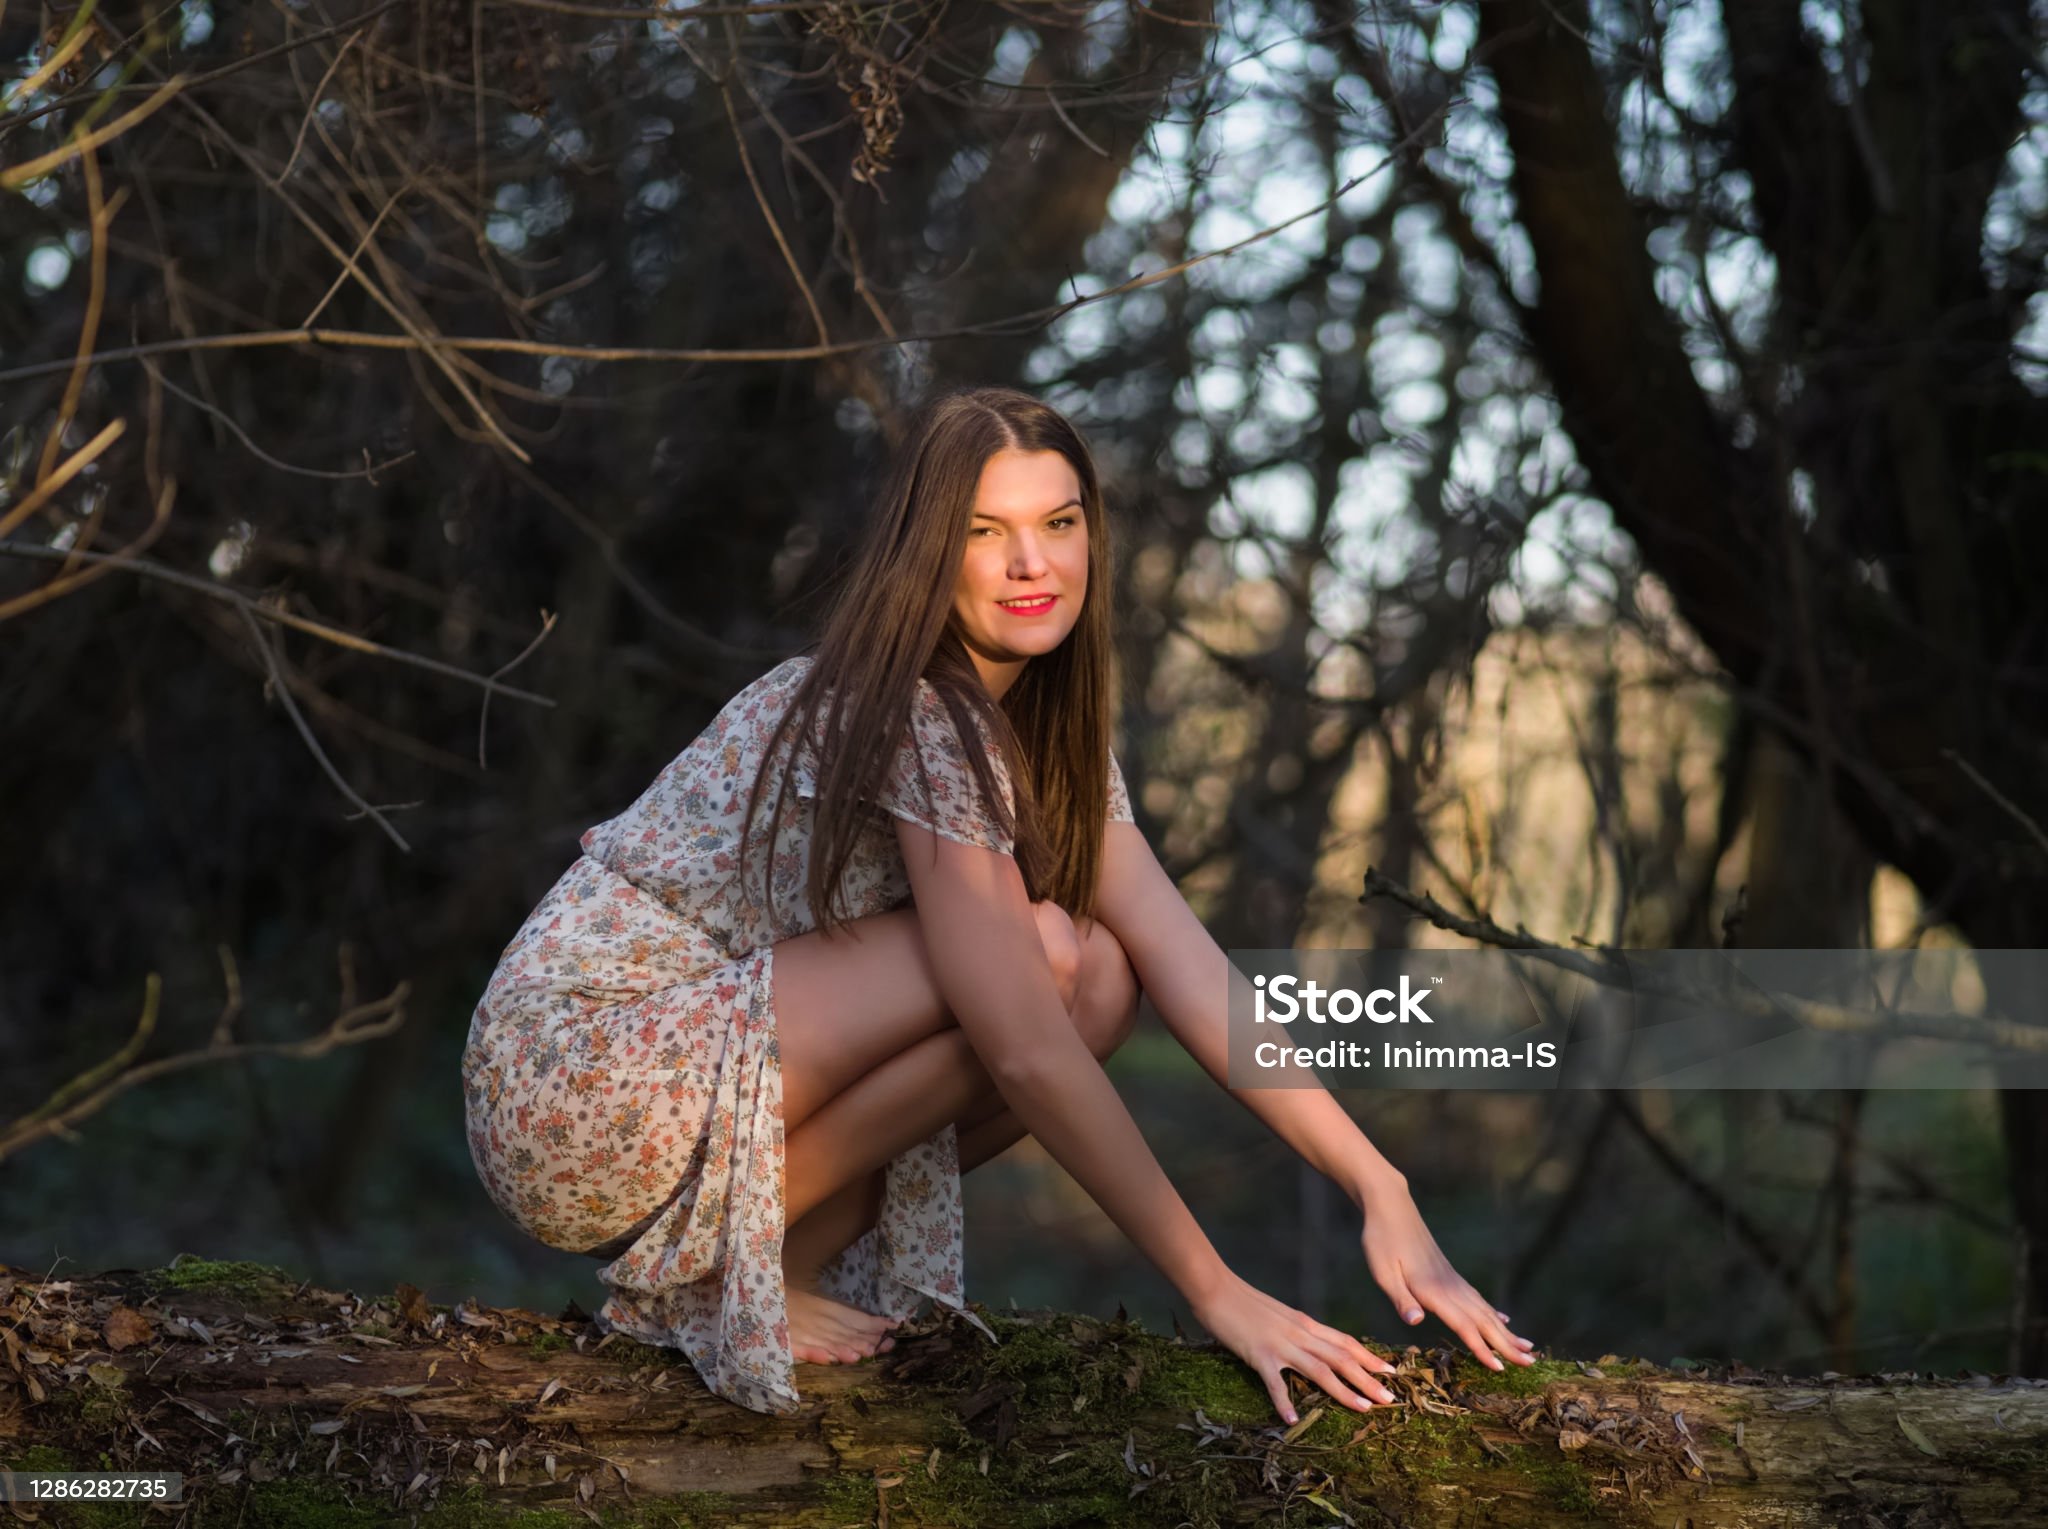 https://media.istockphoto.com/id/1286282735/photo/woman-in-floral-dress-squatting-on-a-tree-in-the-forest.jpg?s=2048x2048&amp;w=is&amp;k=20&amp;c=be1FeEa0Q21cy_d4Ai6a7dCuwNBX2Y44N-1E-SDnAWE=